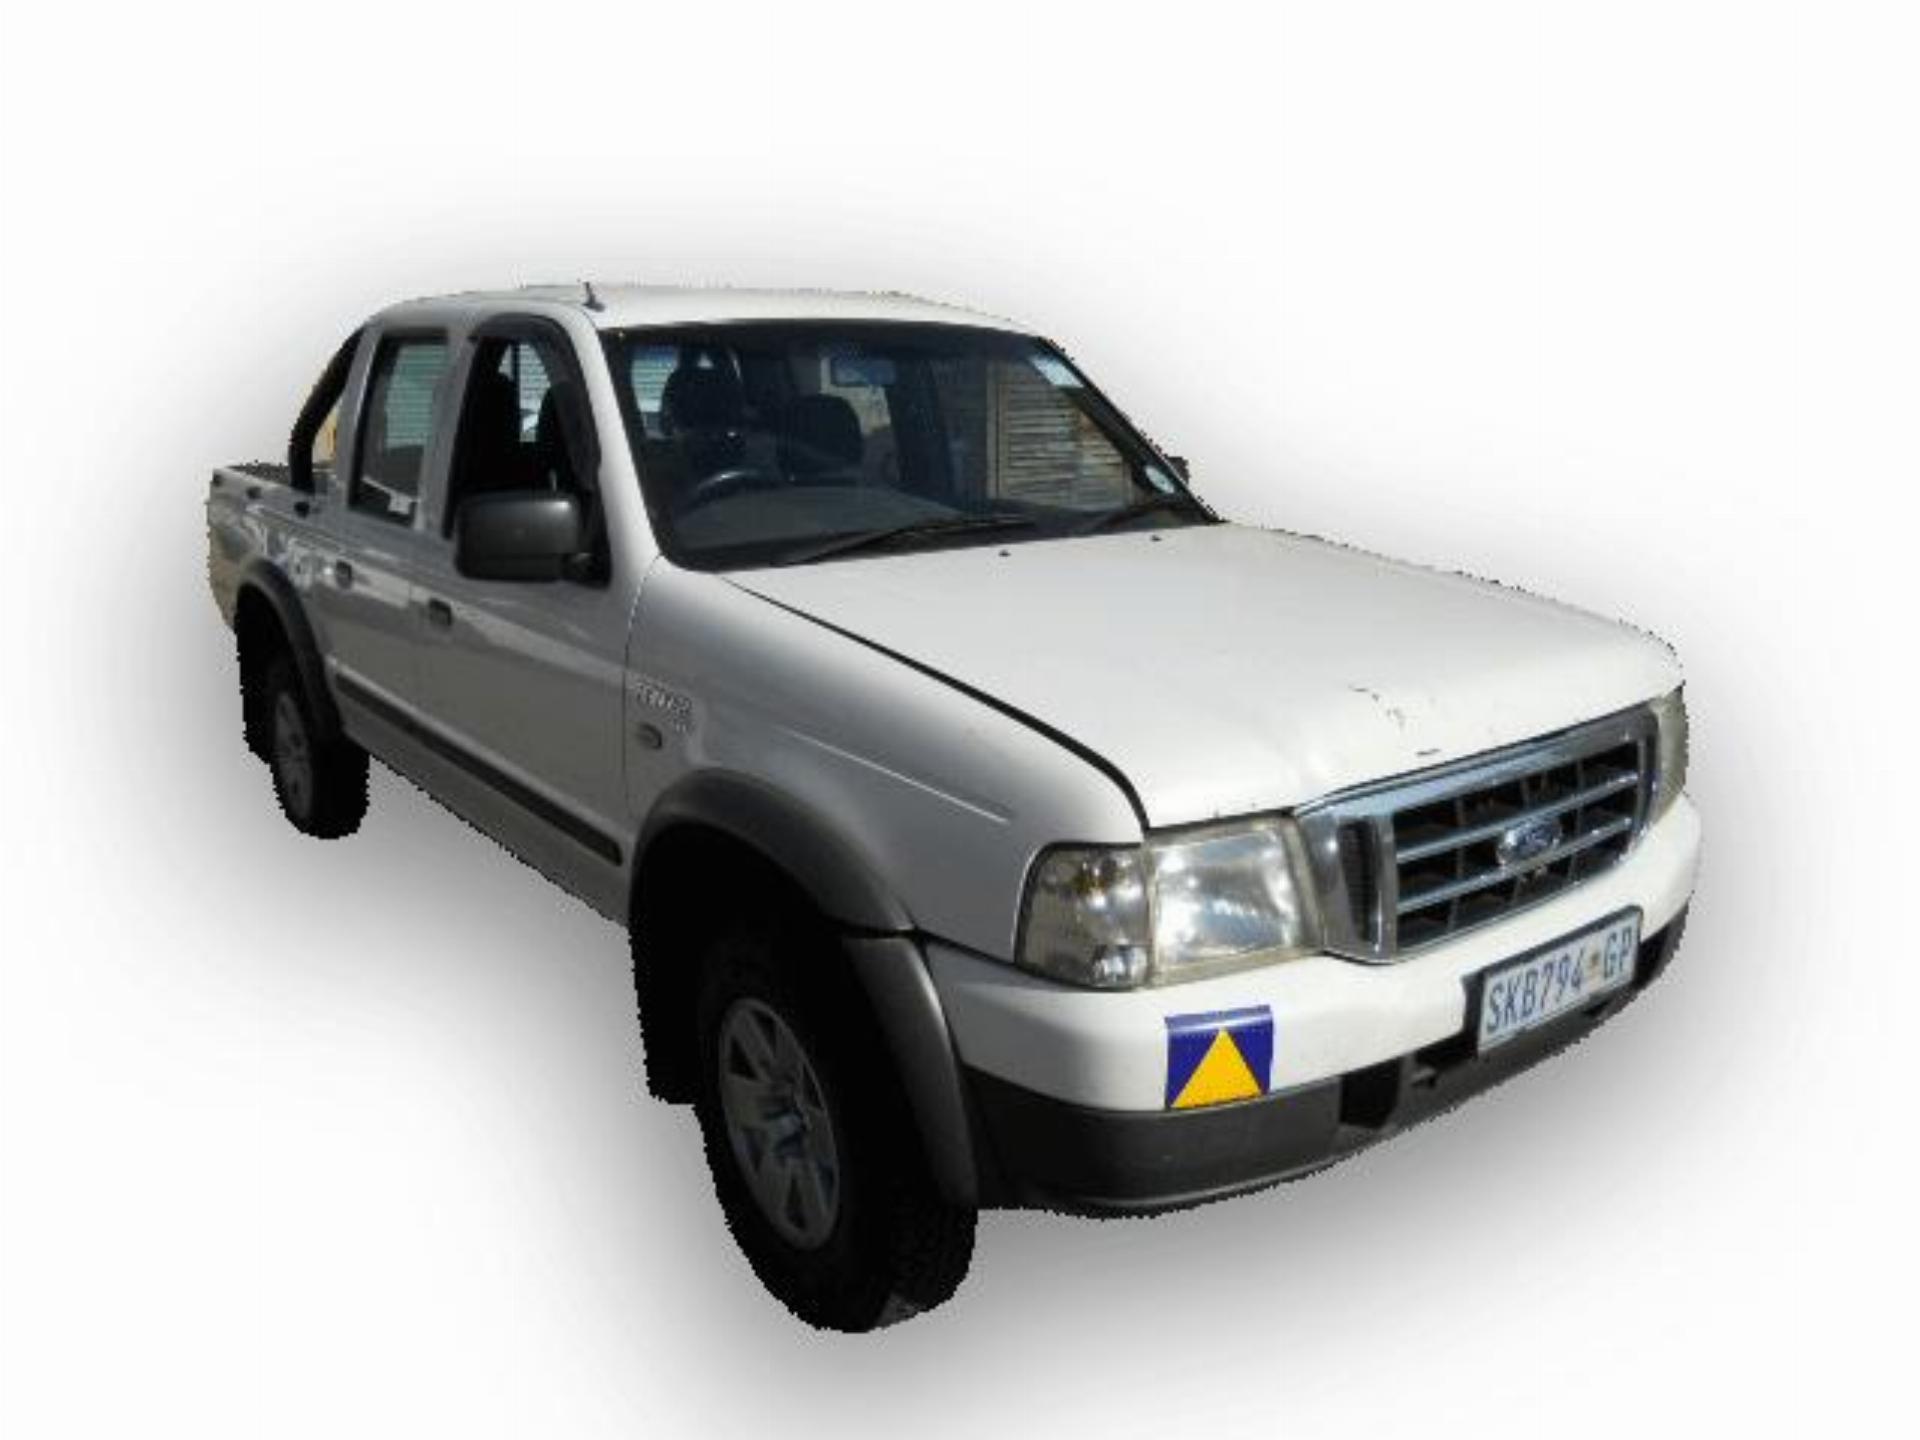 Ford Ranger 2500D Turbo Double Cab 5 Speed